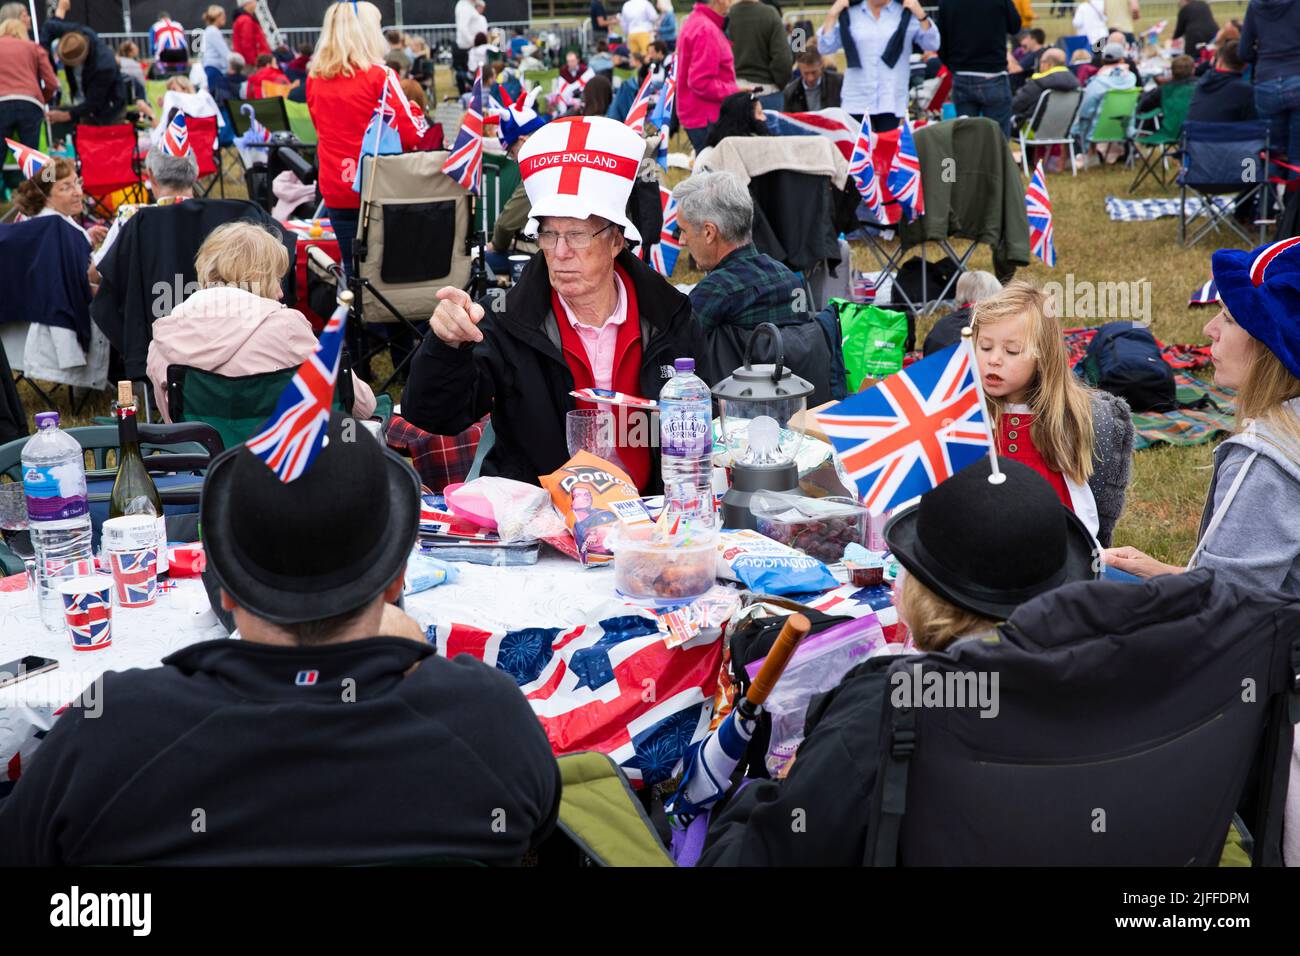 Woodstock, Oxfordshire, UK. 2nd July 2022. Man in hat with 'I love england' and Red Ensign. Battle Prom Picnic Concerts. Blenheim Palace. United Kingdom. Credit: Alexander Caminada/Alamy Live News Stock Photo